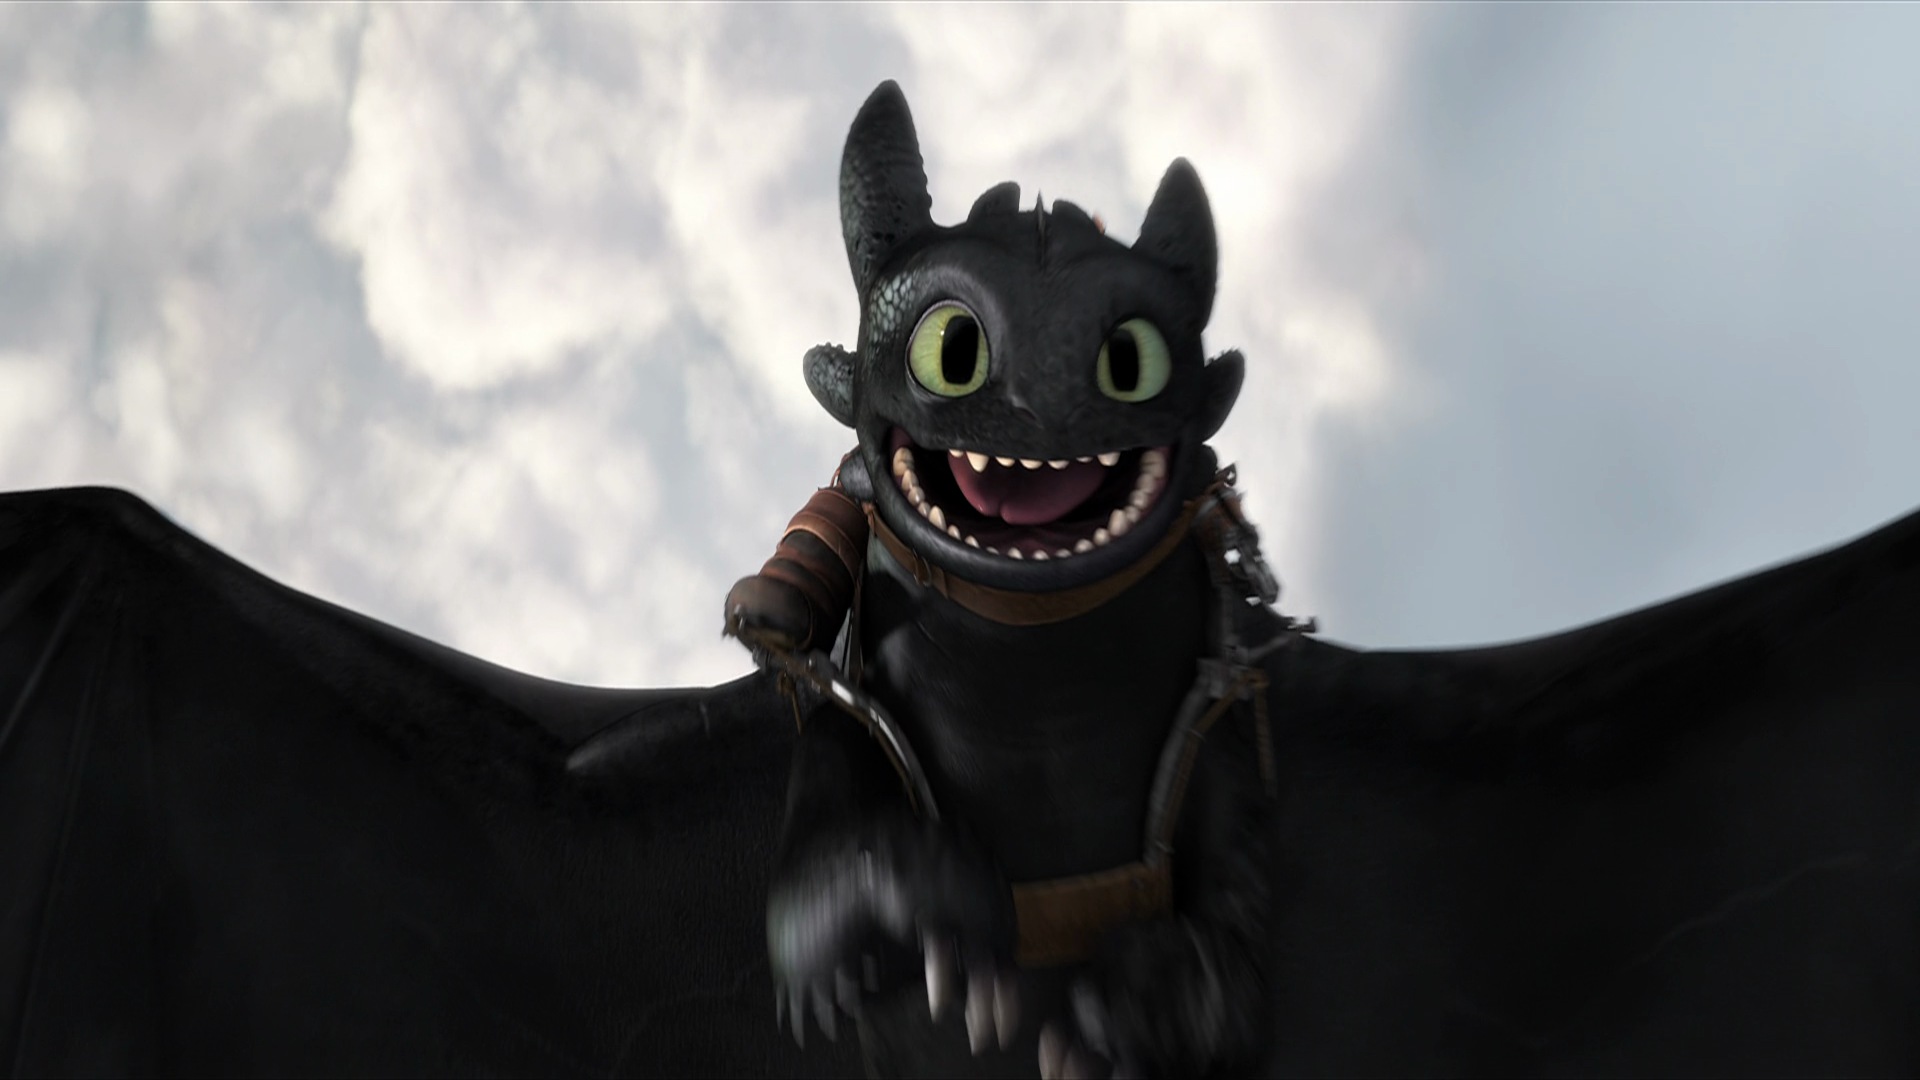 Toothless HD Backgrounds Download | Wallpapers, Backgrounds ...